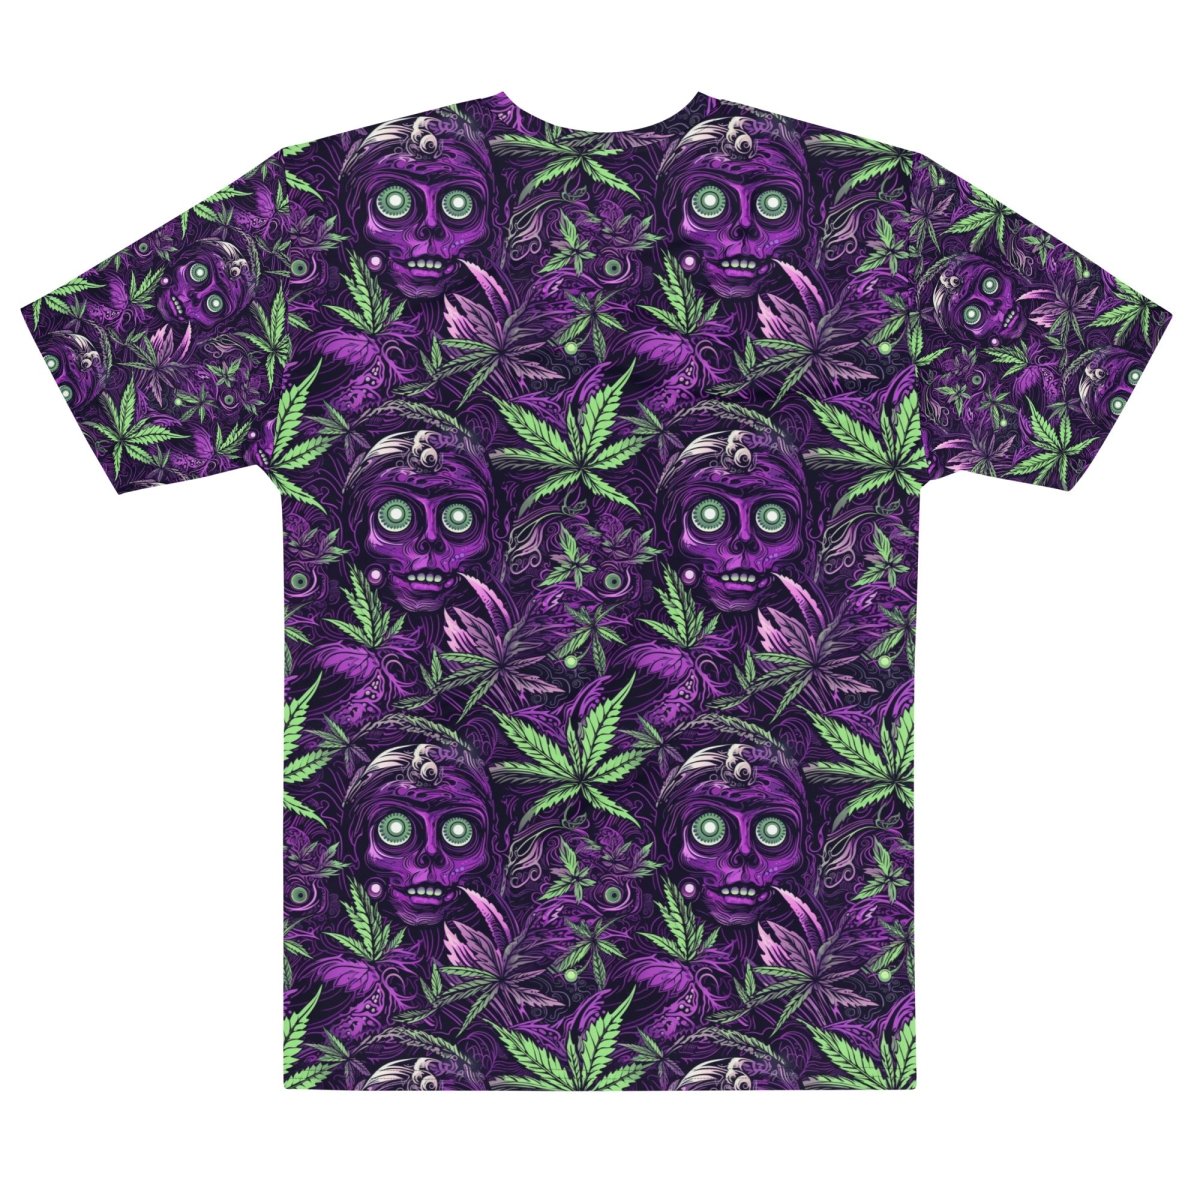 Leaves & Creature T-Shirt - Mainly High